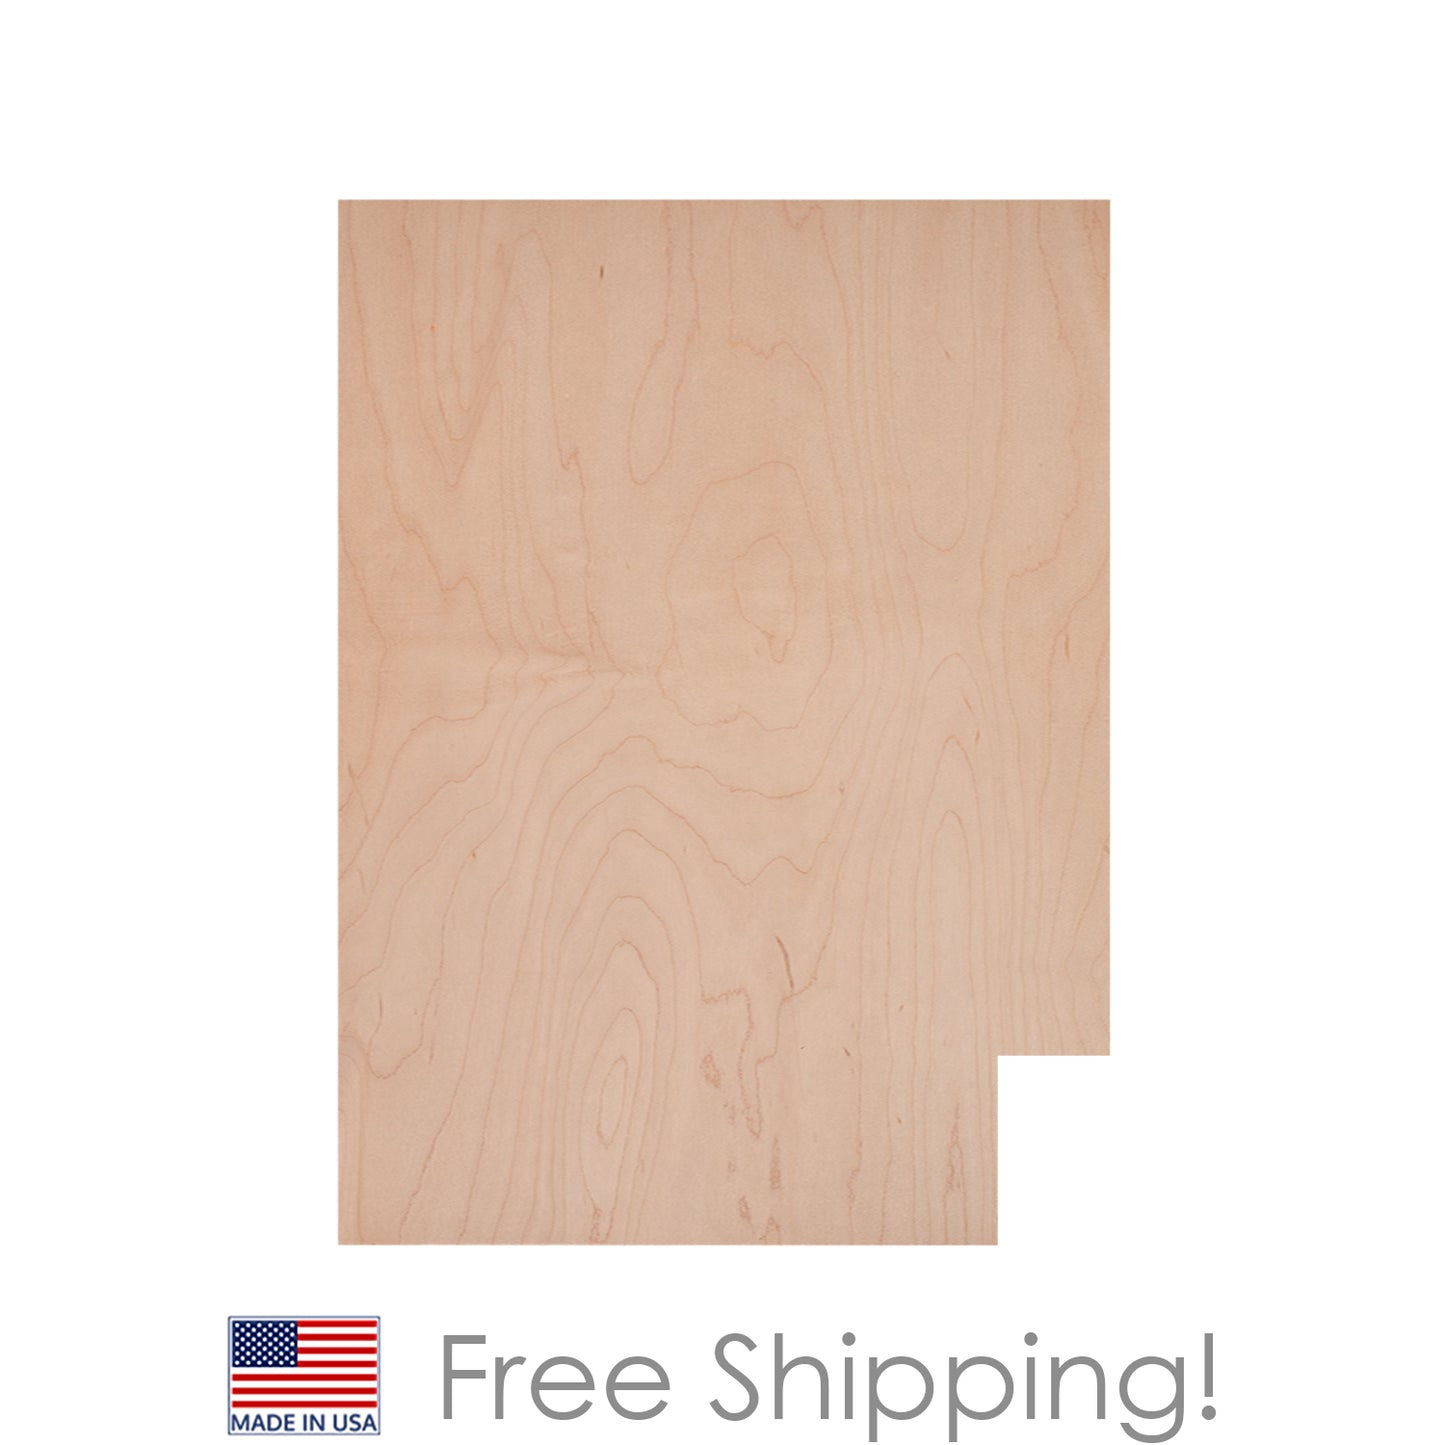 Quicklock RTA (Ready-to-Assemble) Raw Maple .25"X23.25"X34.5" End Panel - Left Side